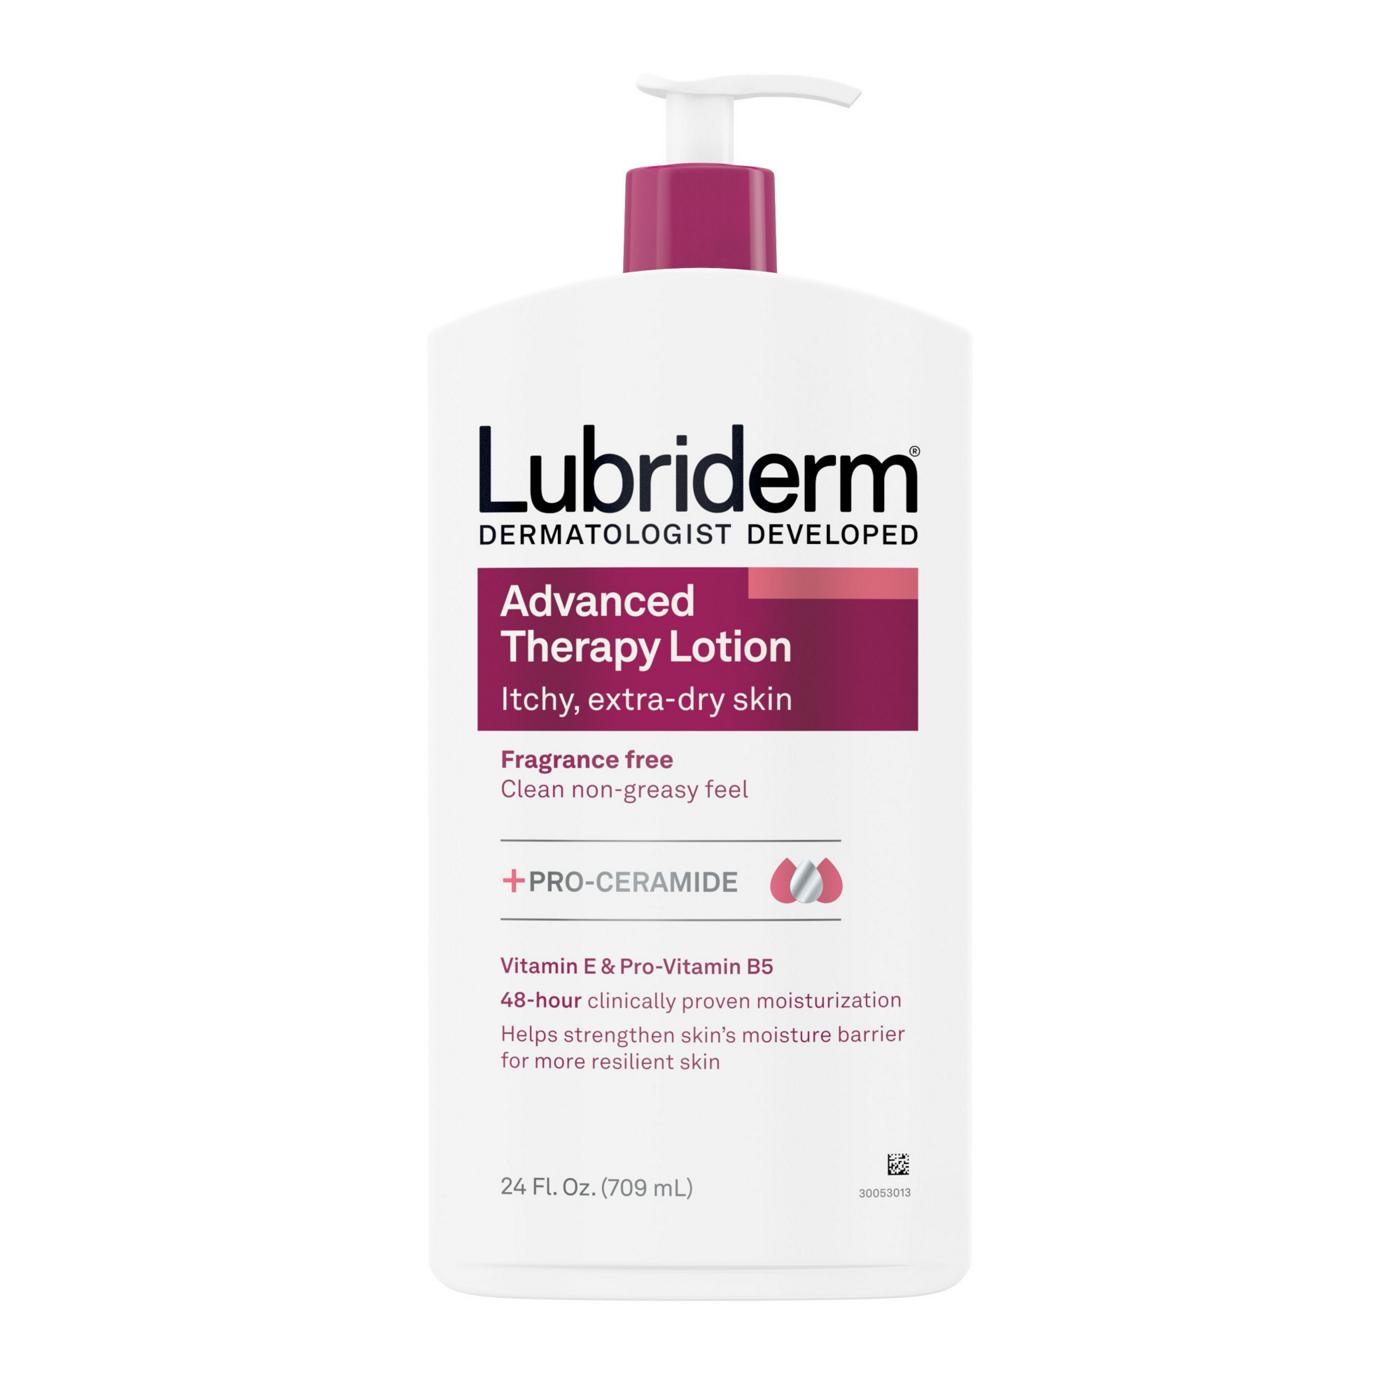 Lubriderm Advanced Therapy Lotion; image 1 of 9